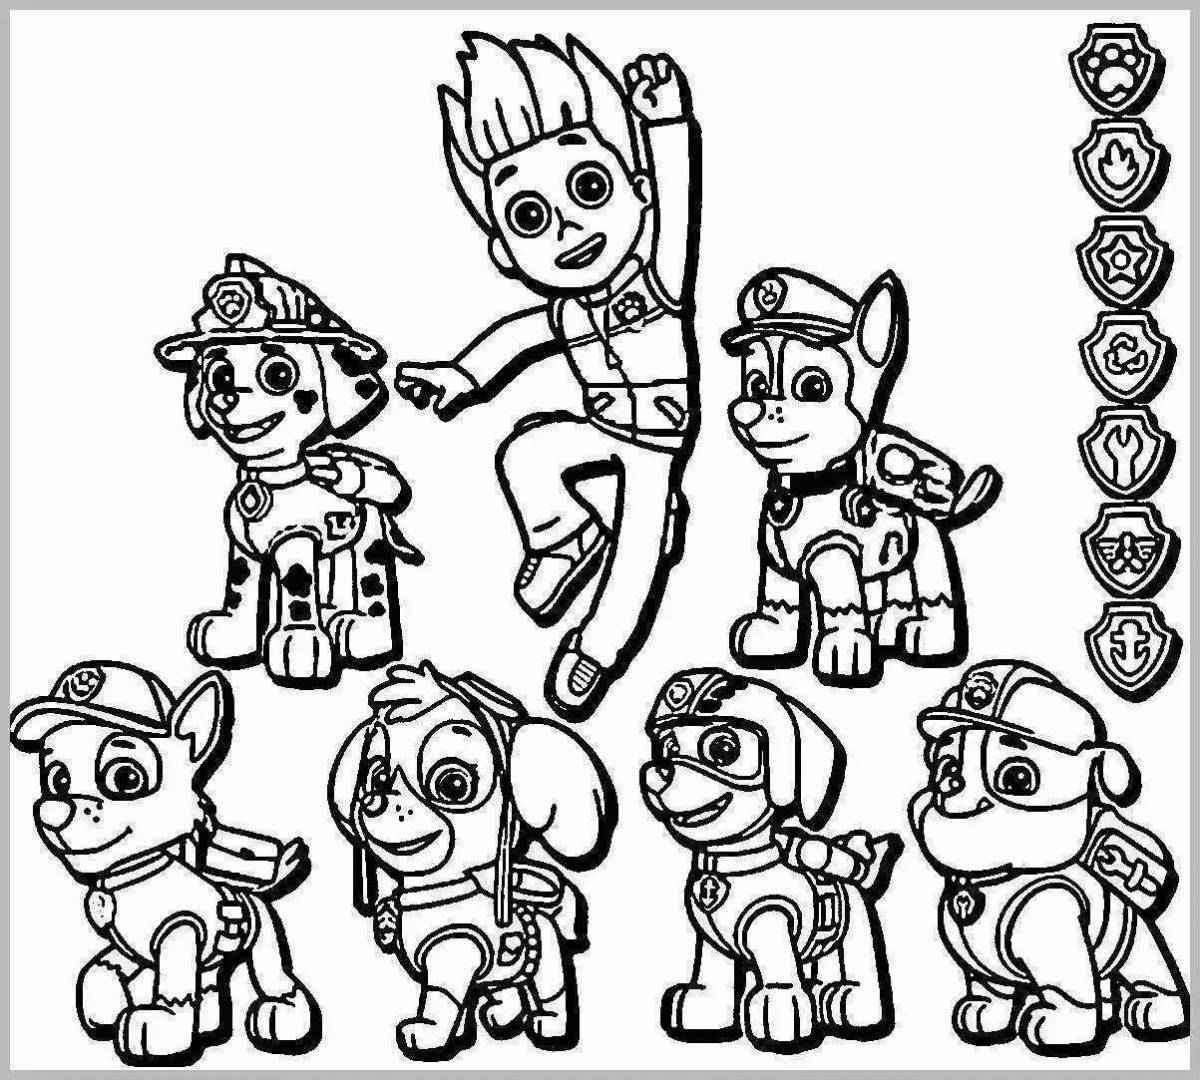 Outstanding paw patrol coloring book for boys